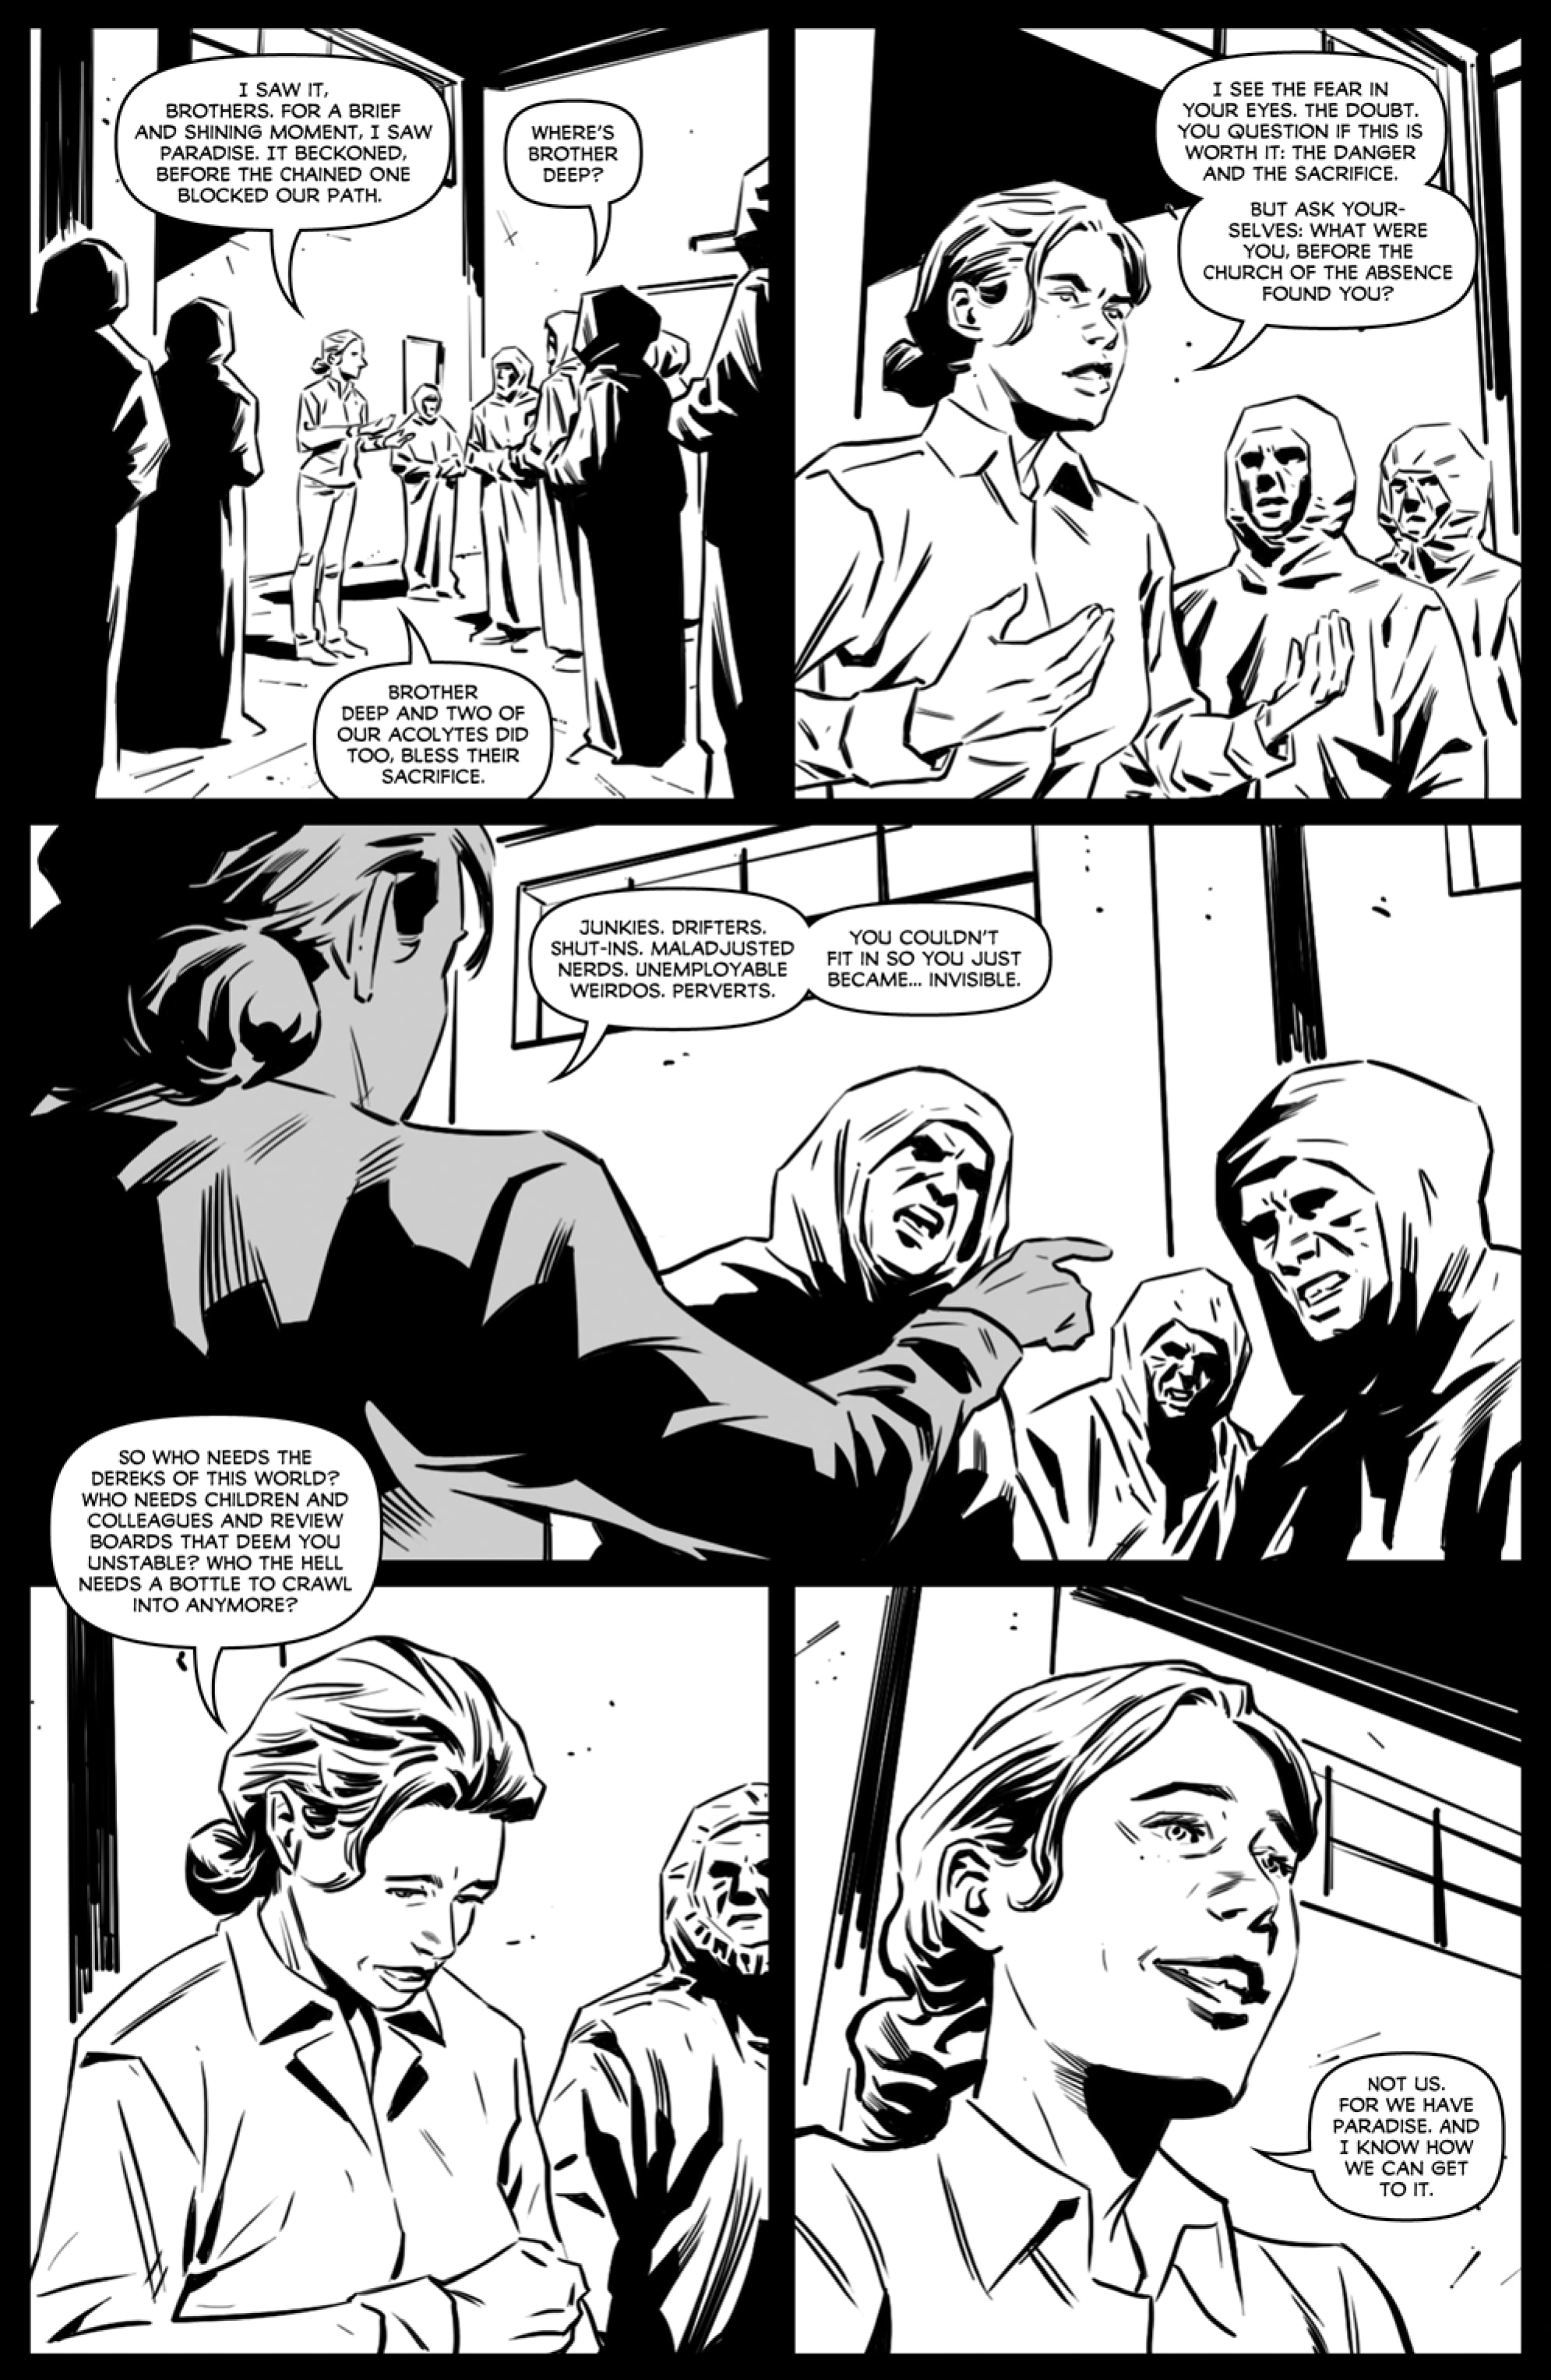 American Mythology Monsters Vol. 2 (2021-): Chapter 2 - Page 5